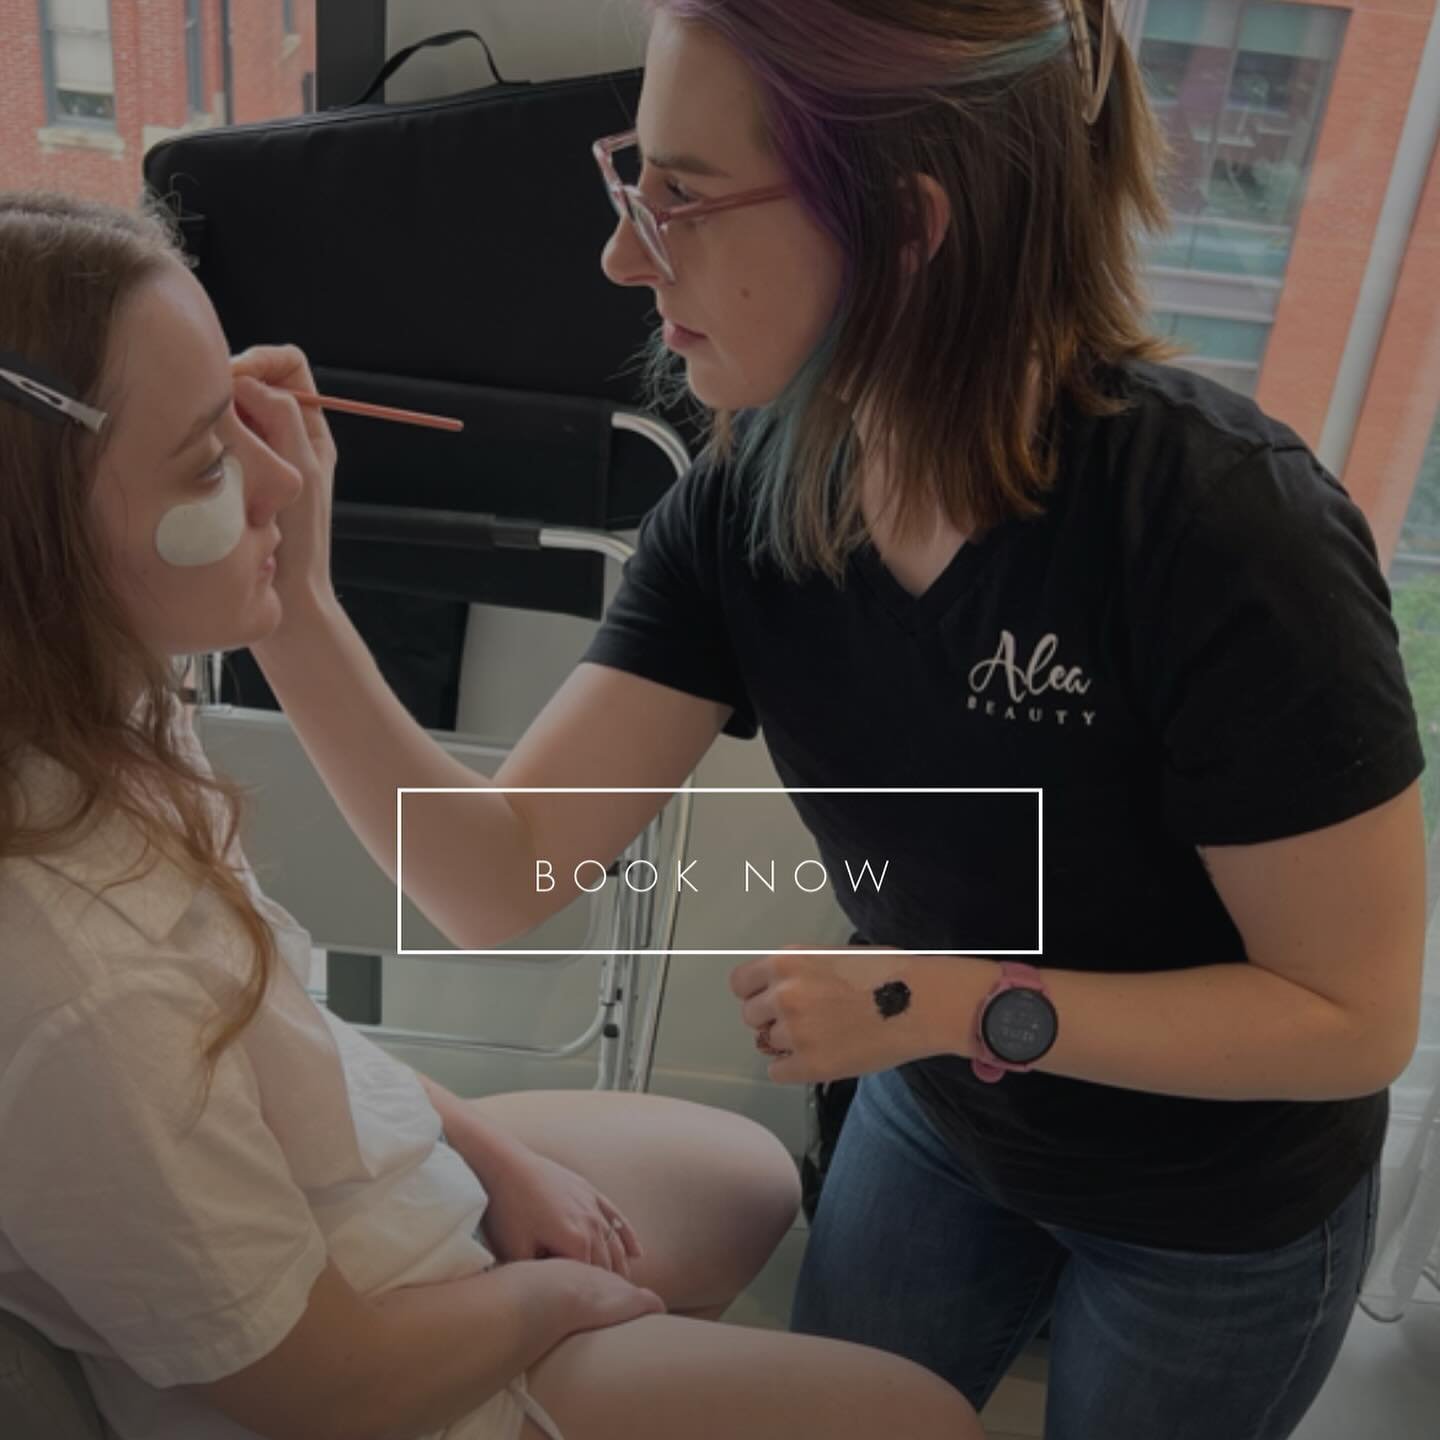 Attention Ohio Brides! We still have a few select summer wedding openings through our booking app for small groups or bride-only hair and makeup. 

Book with Rachel or Leigh Ann today!

Looking for that perfect wedding spray tan? Book with Alli!

htt